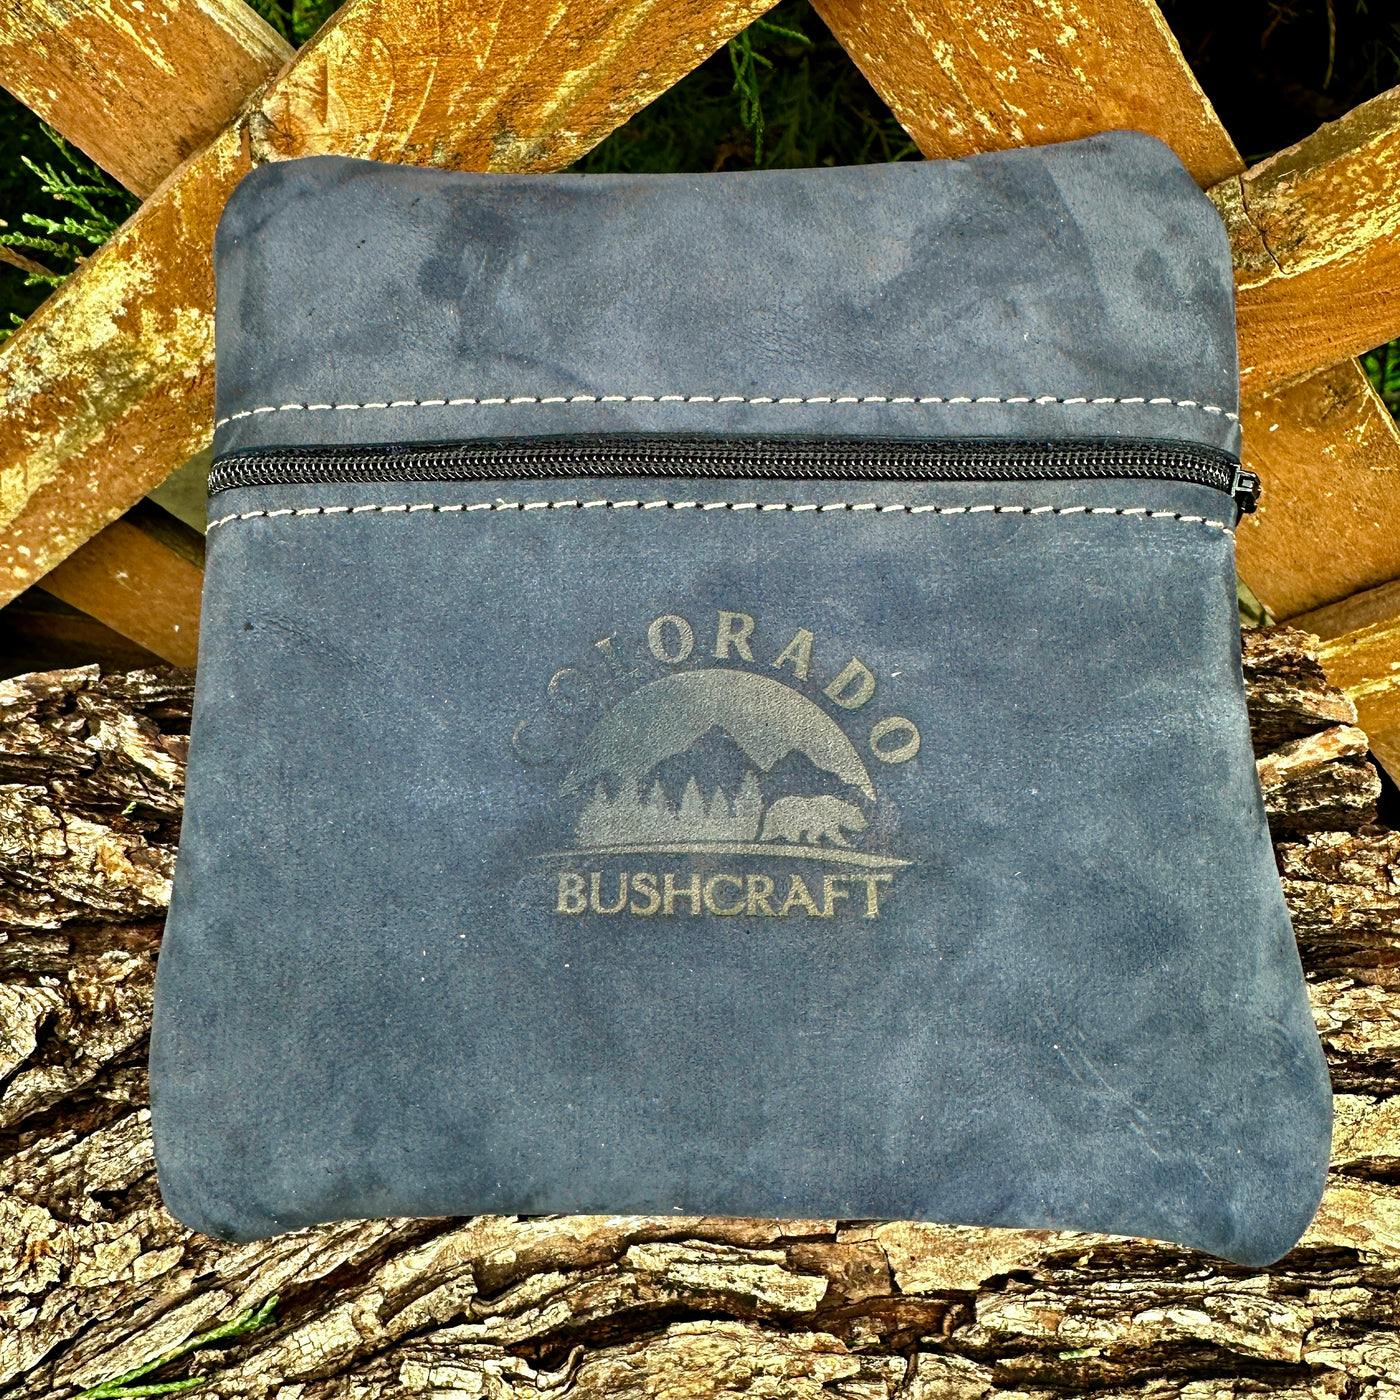 Premium Leather Traditional Small EDC Pouch Bushcraft Survival Camping Possibles Dopp Grooming